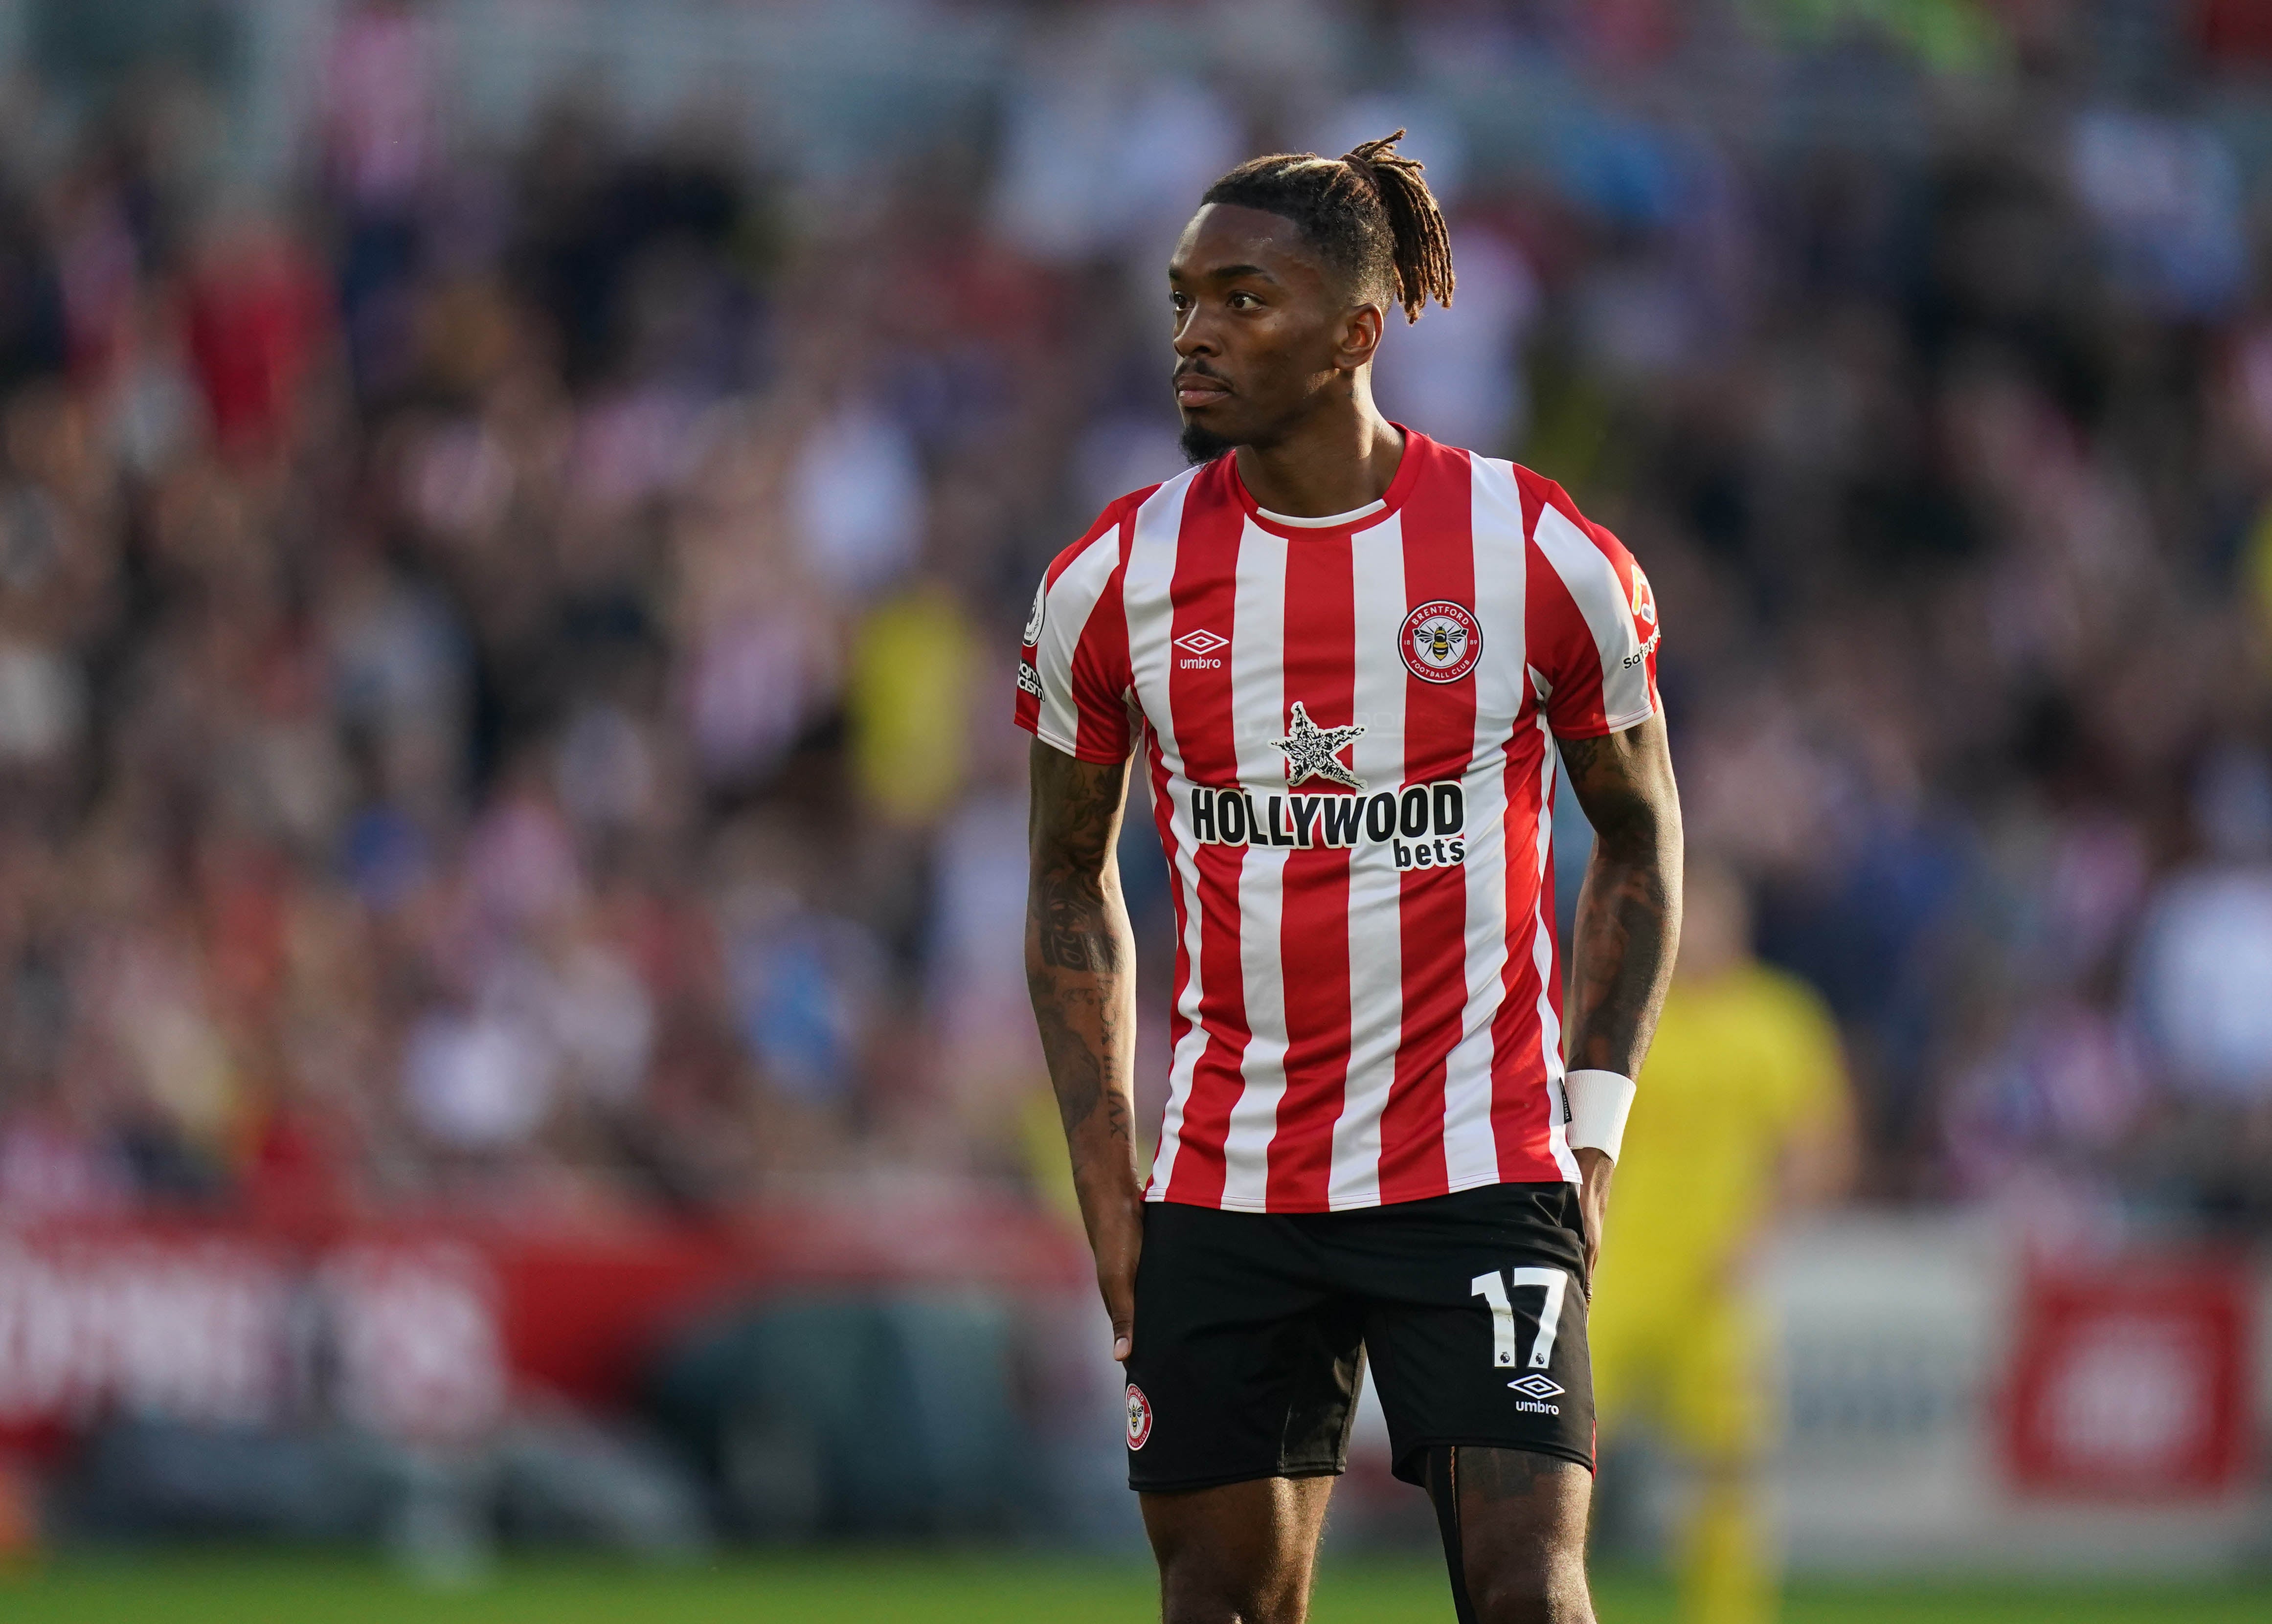 Brentford’s Ivan Toney says his family suffered racist abuse at the Everton game